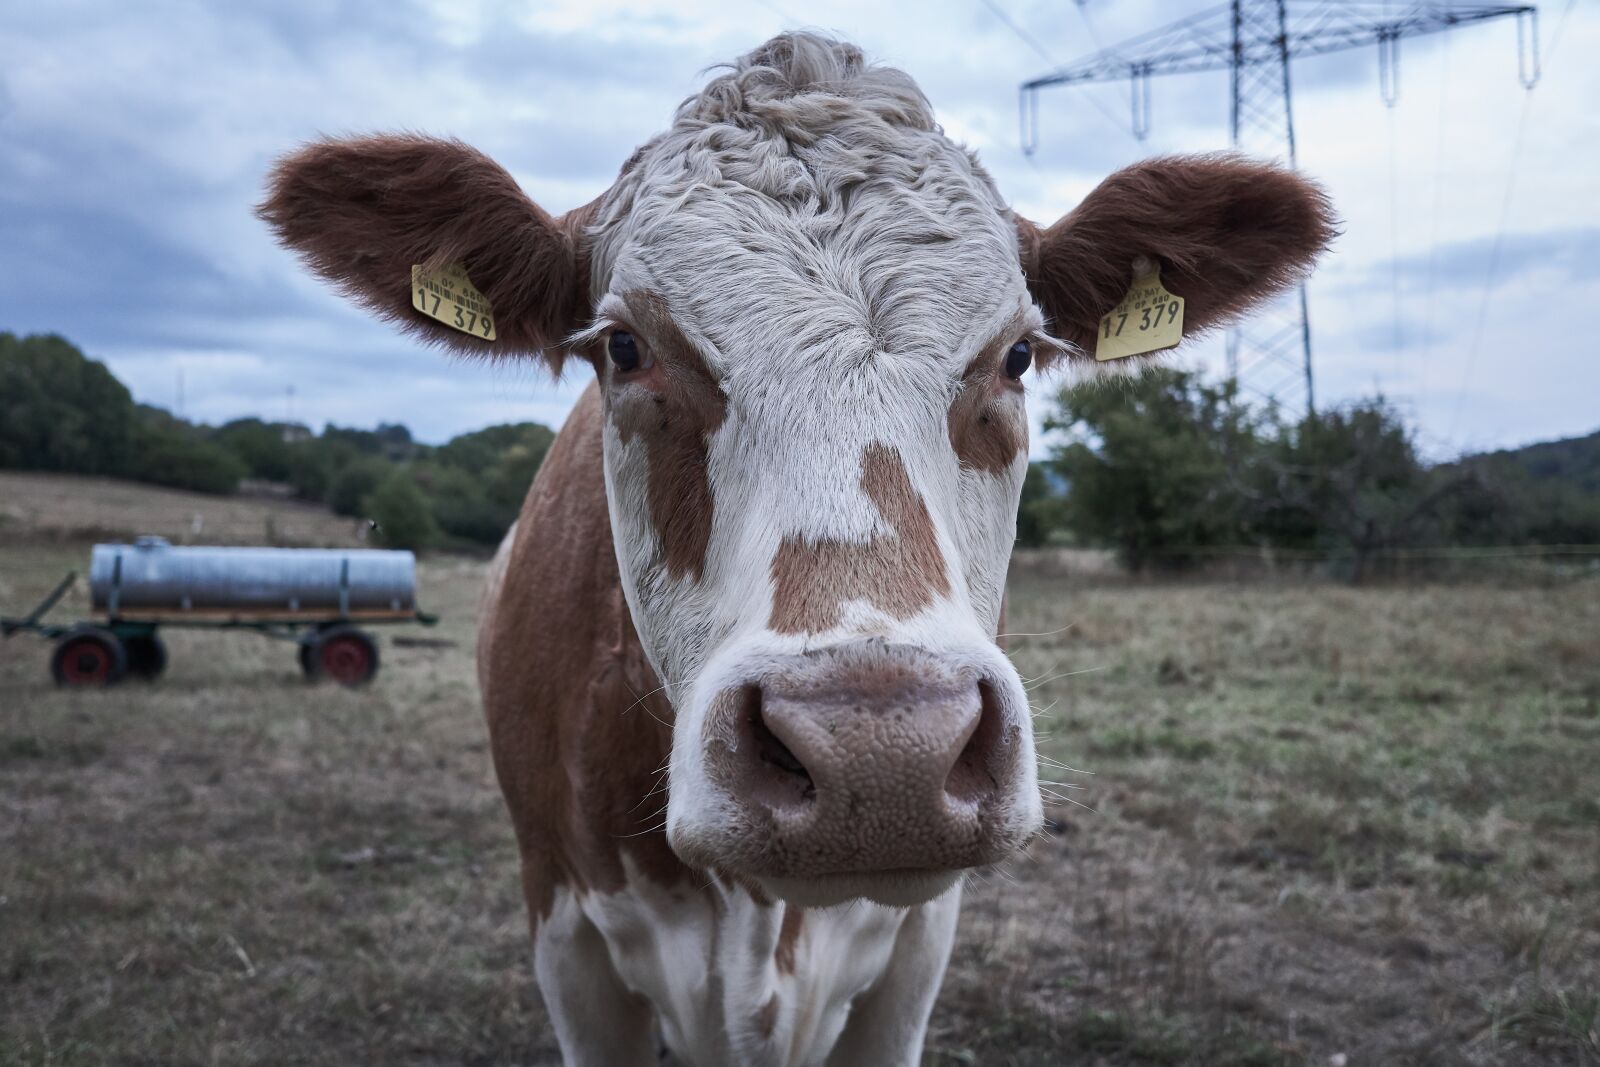 Sony a6000 sample photo. Cow, pasture, animal photography